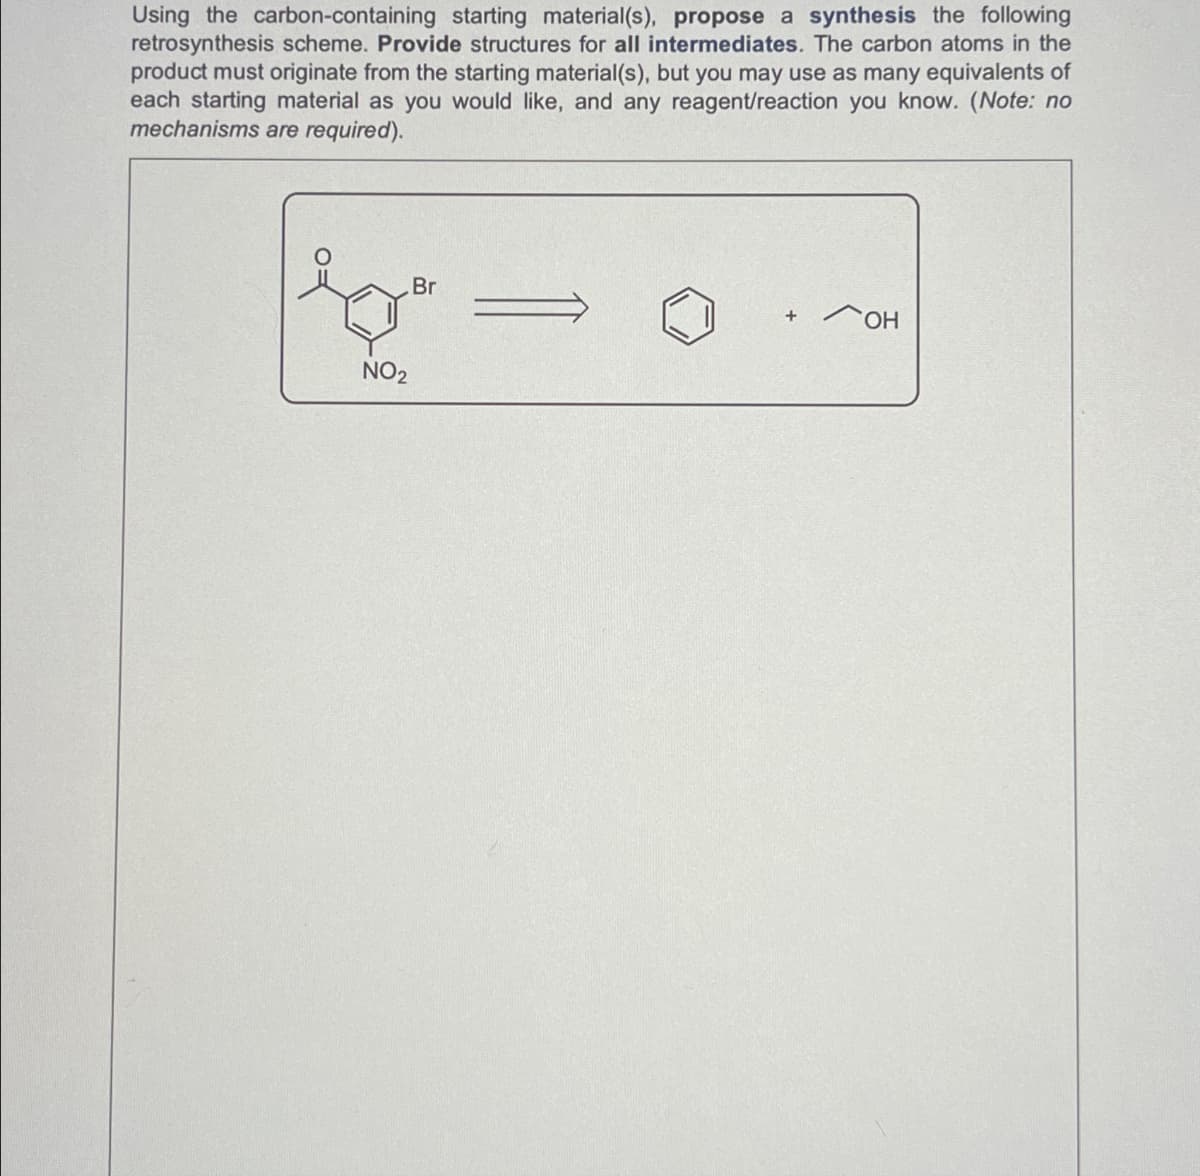 Using the carbon-containing starting material(s), propose a synthesis the following
retrosynthesis scheme. Provide structures for all intermediates. The carbon atoms in the
product must originate from the starting material(s), but you may use as many equivalents of
each starting material as you would like, and any reagent/reaction you know. (Note: no
mechanisms are required).
NO2
Br
+
он